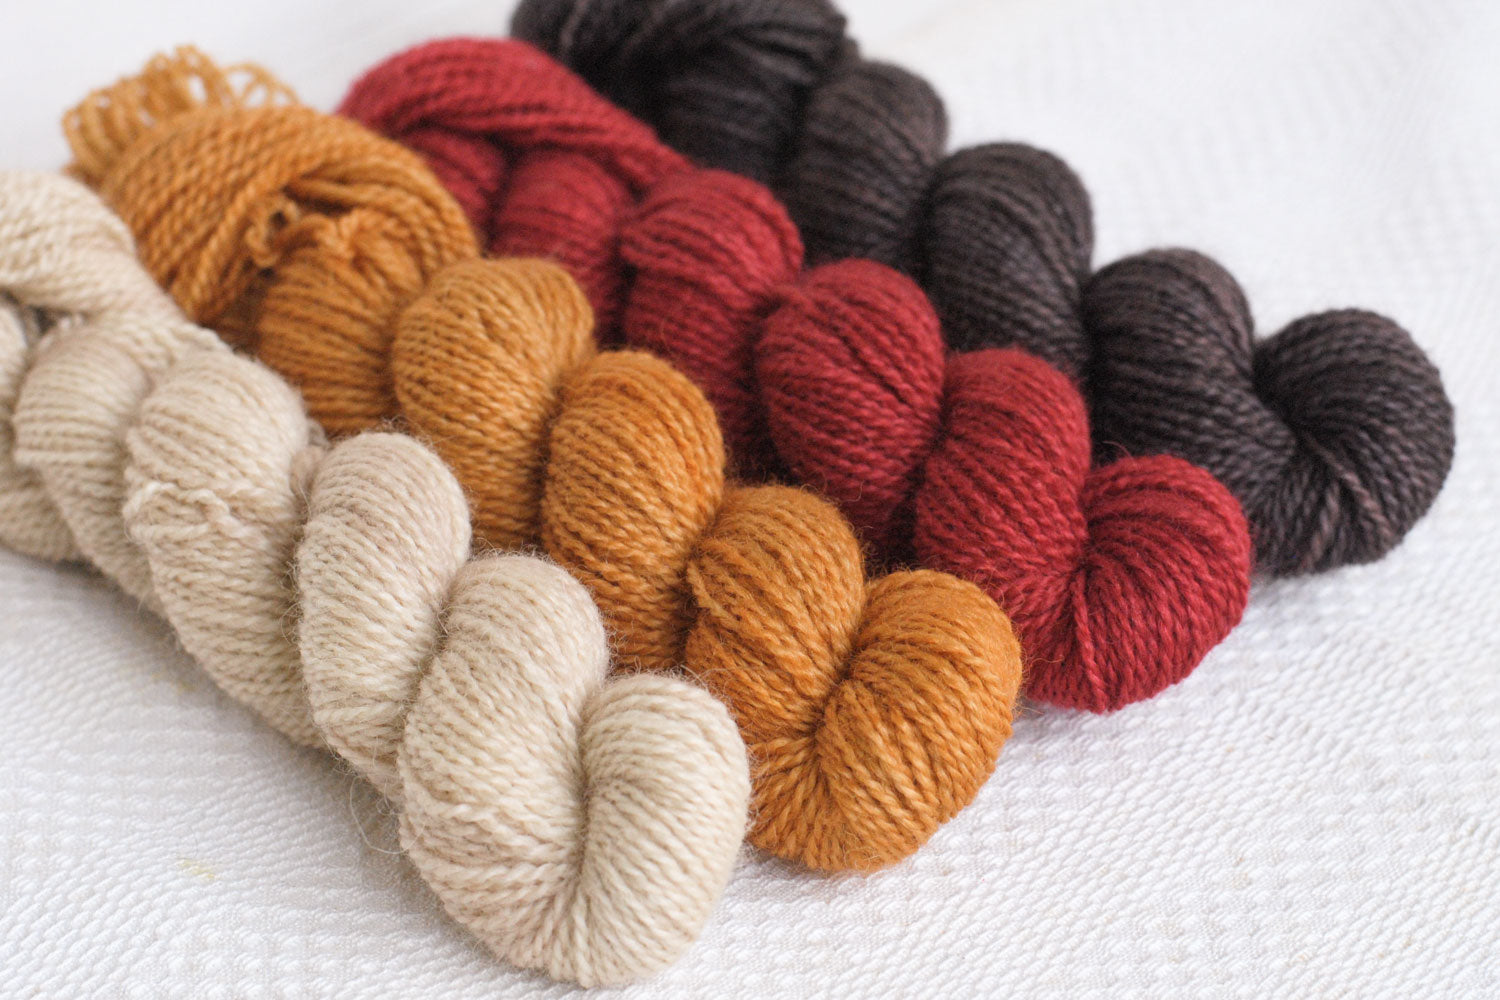 Set of four hand-dyed mini-skeins in beige, gold, red, and brown